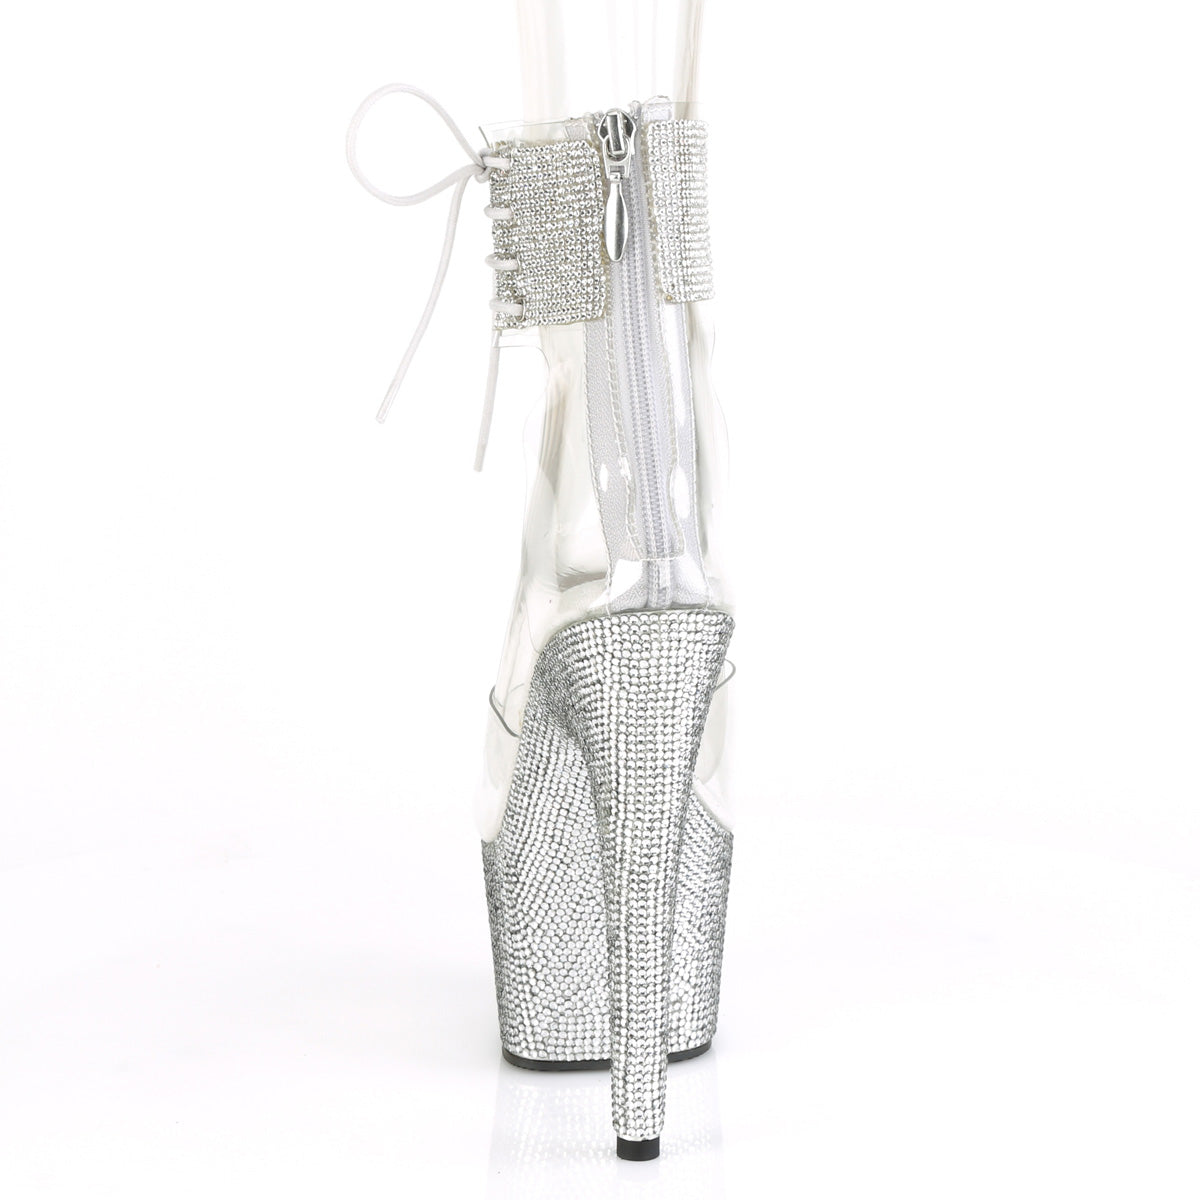 BEJEWELED-724RS Pleaser Pole Dancing Shoes Ankle Boots Pleasers - Sexy Shoes Fetish Footwear